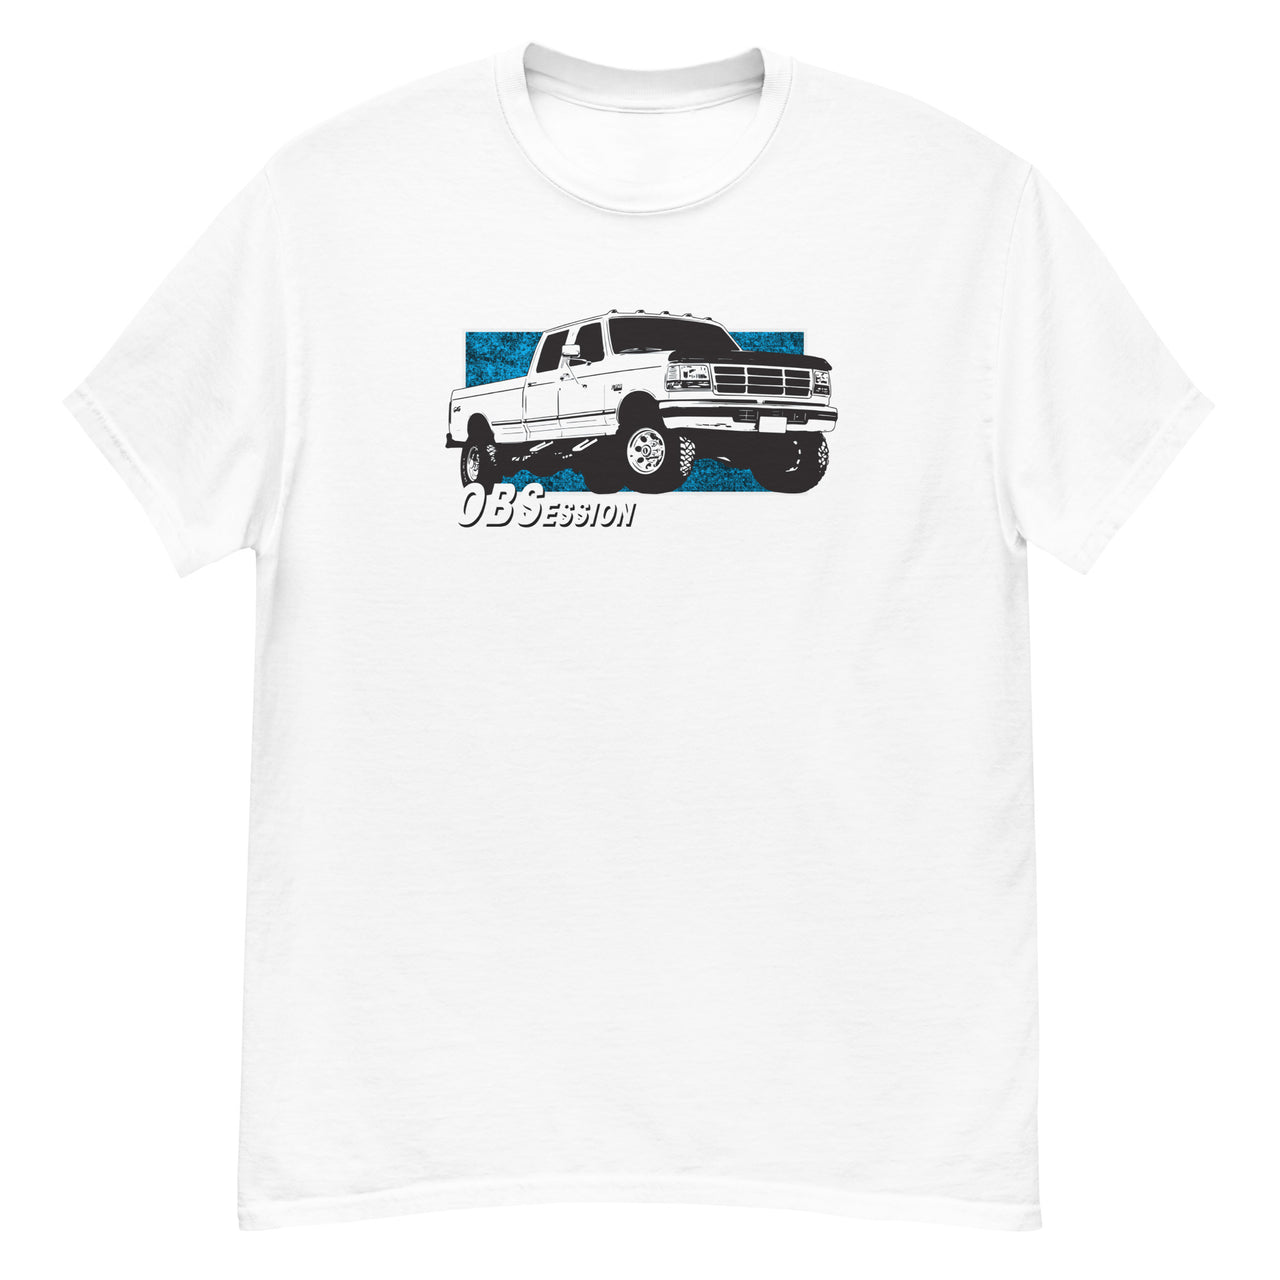 OBS T-Shirt - Crew Cab OBSession in white